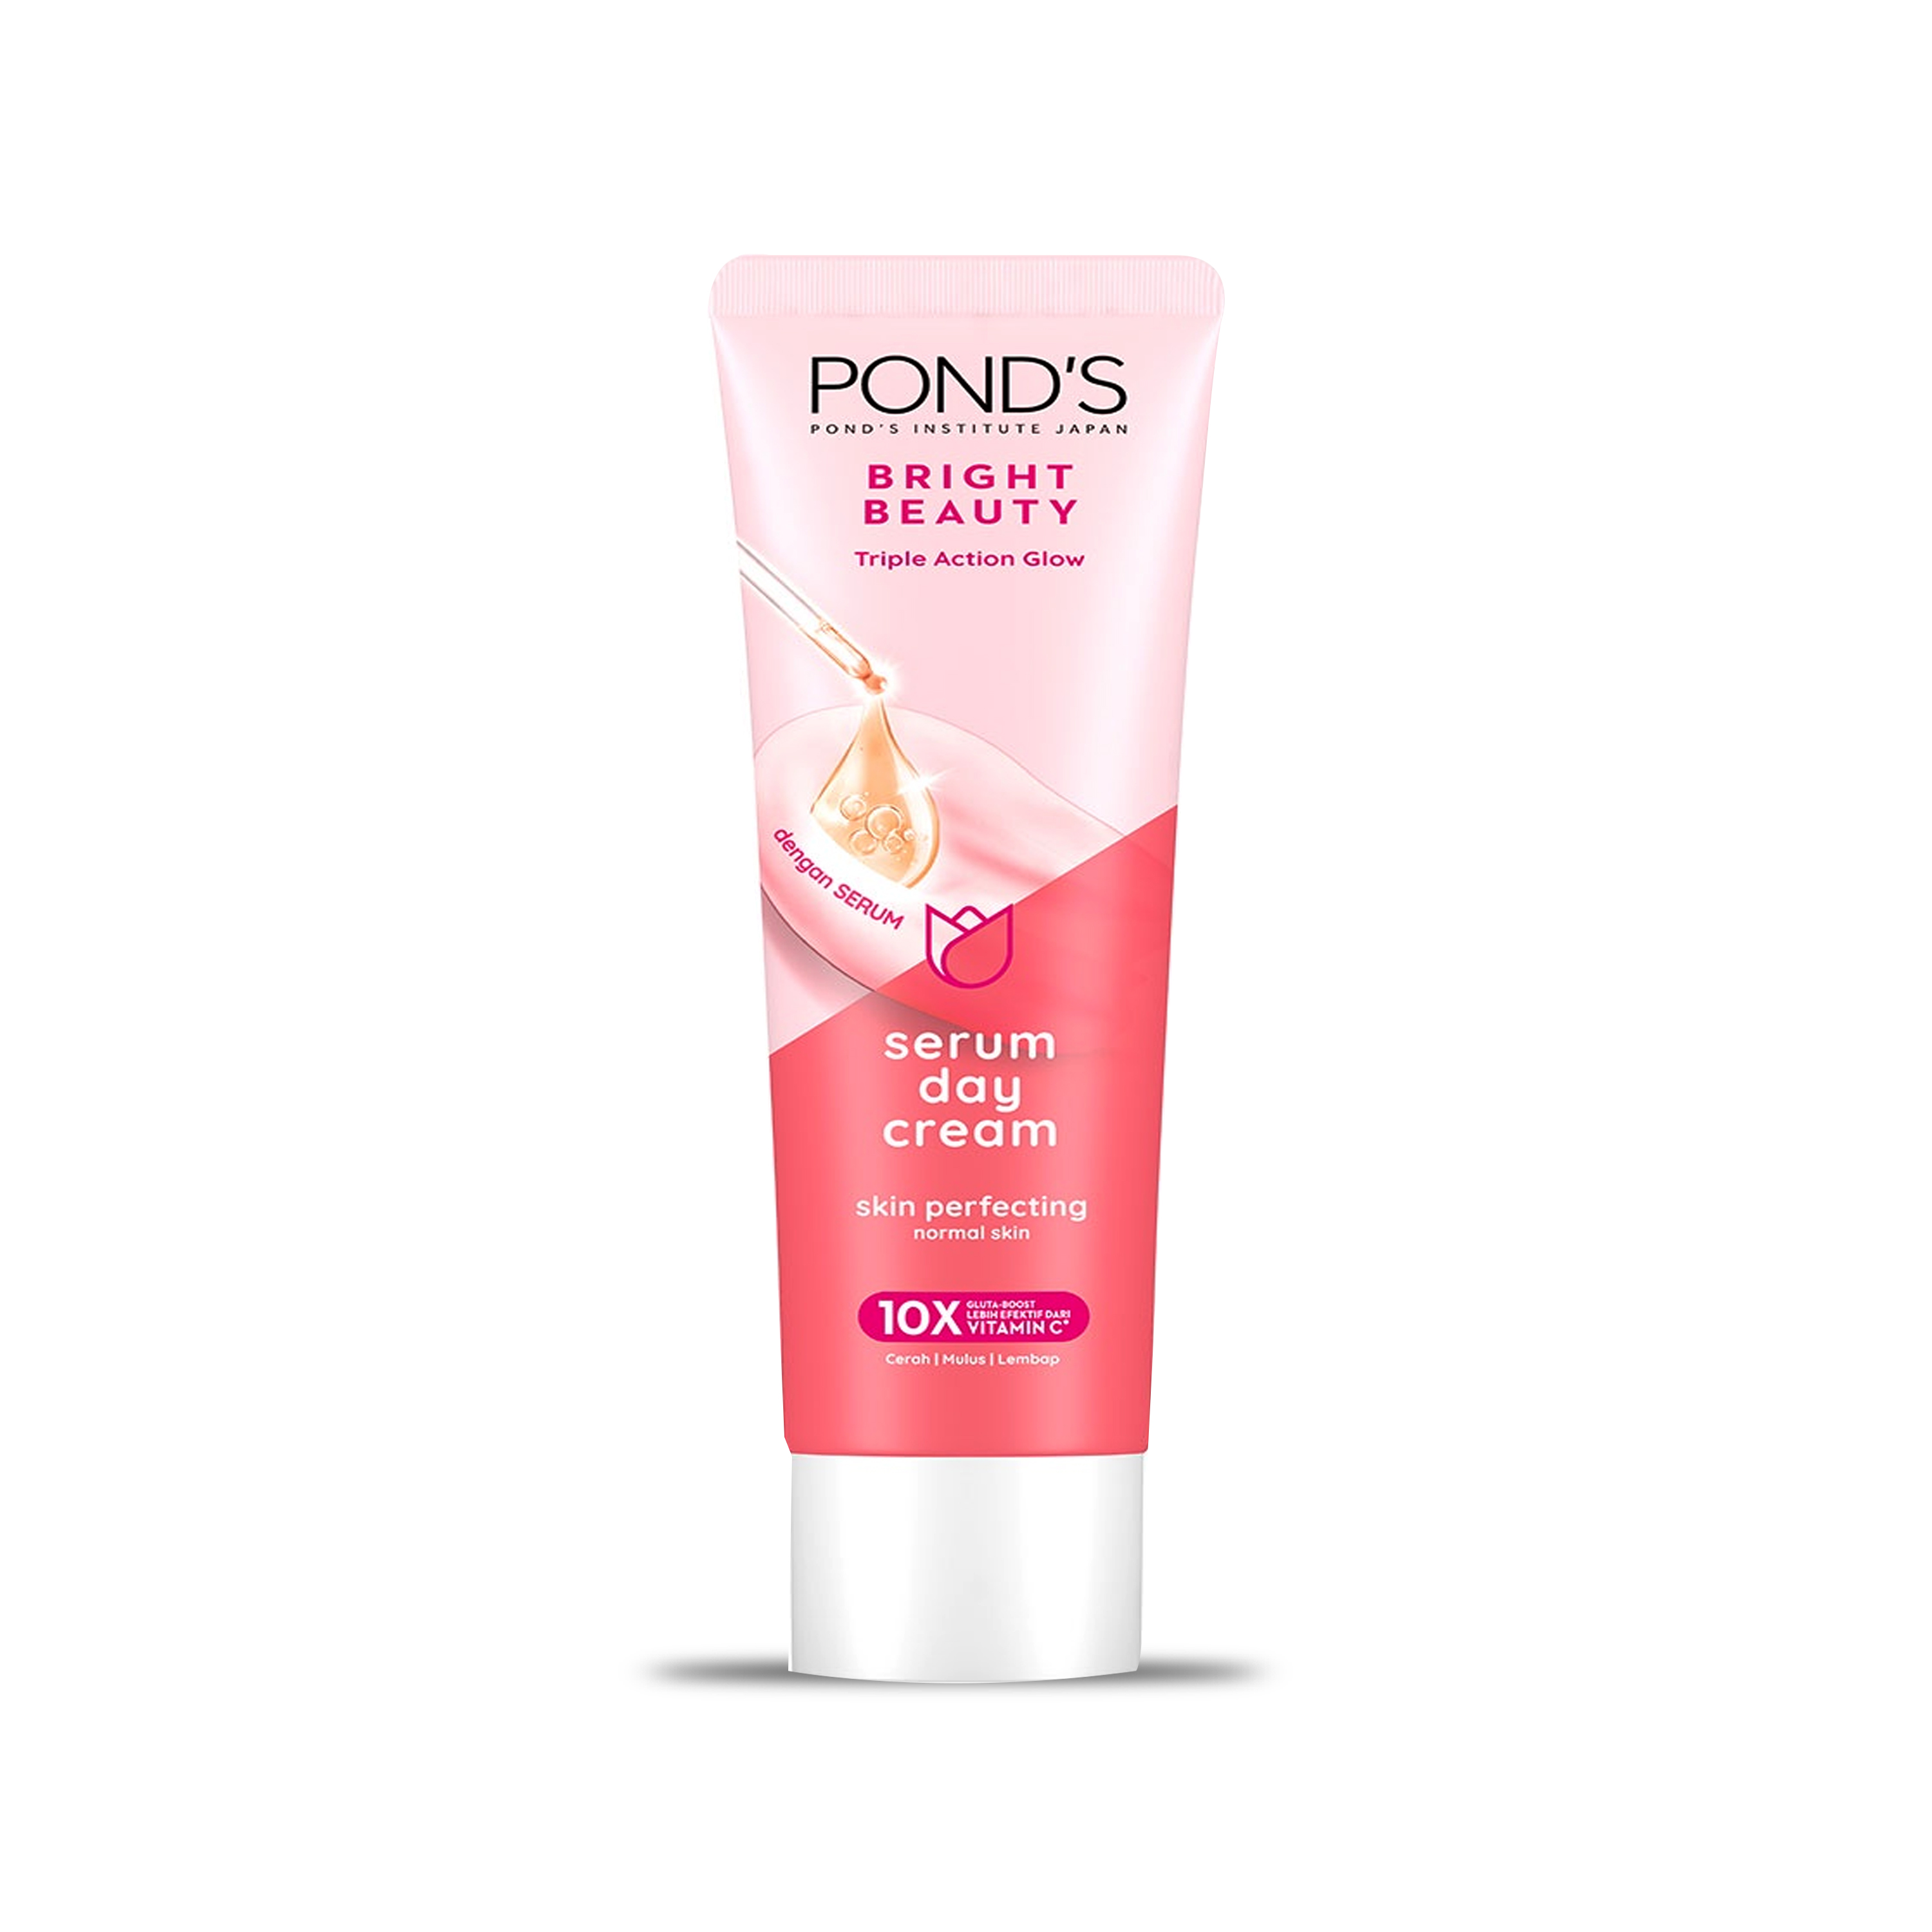 POND'S Ponds Bright Beauty Skin Perfecting Cream for Normal Skin 20 gr /  Pelembab Siang Kulit Normal